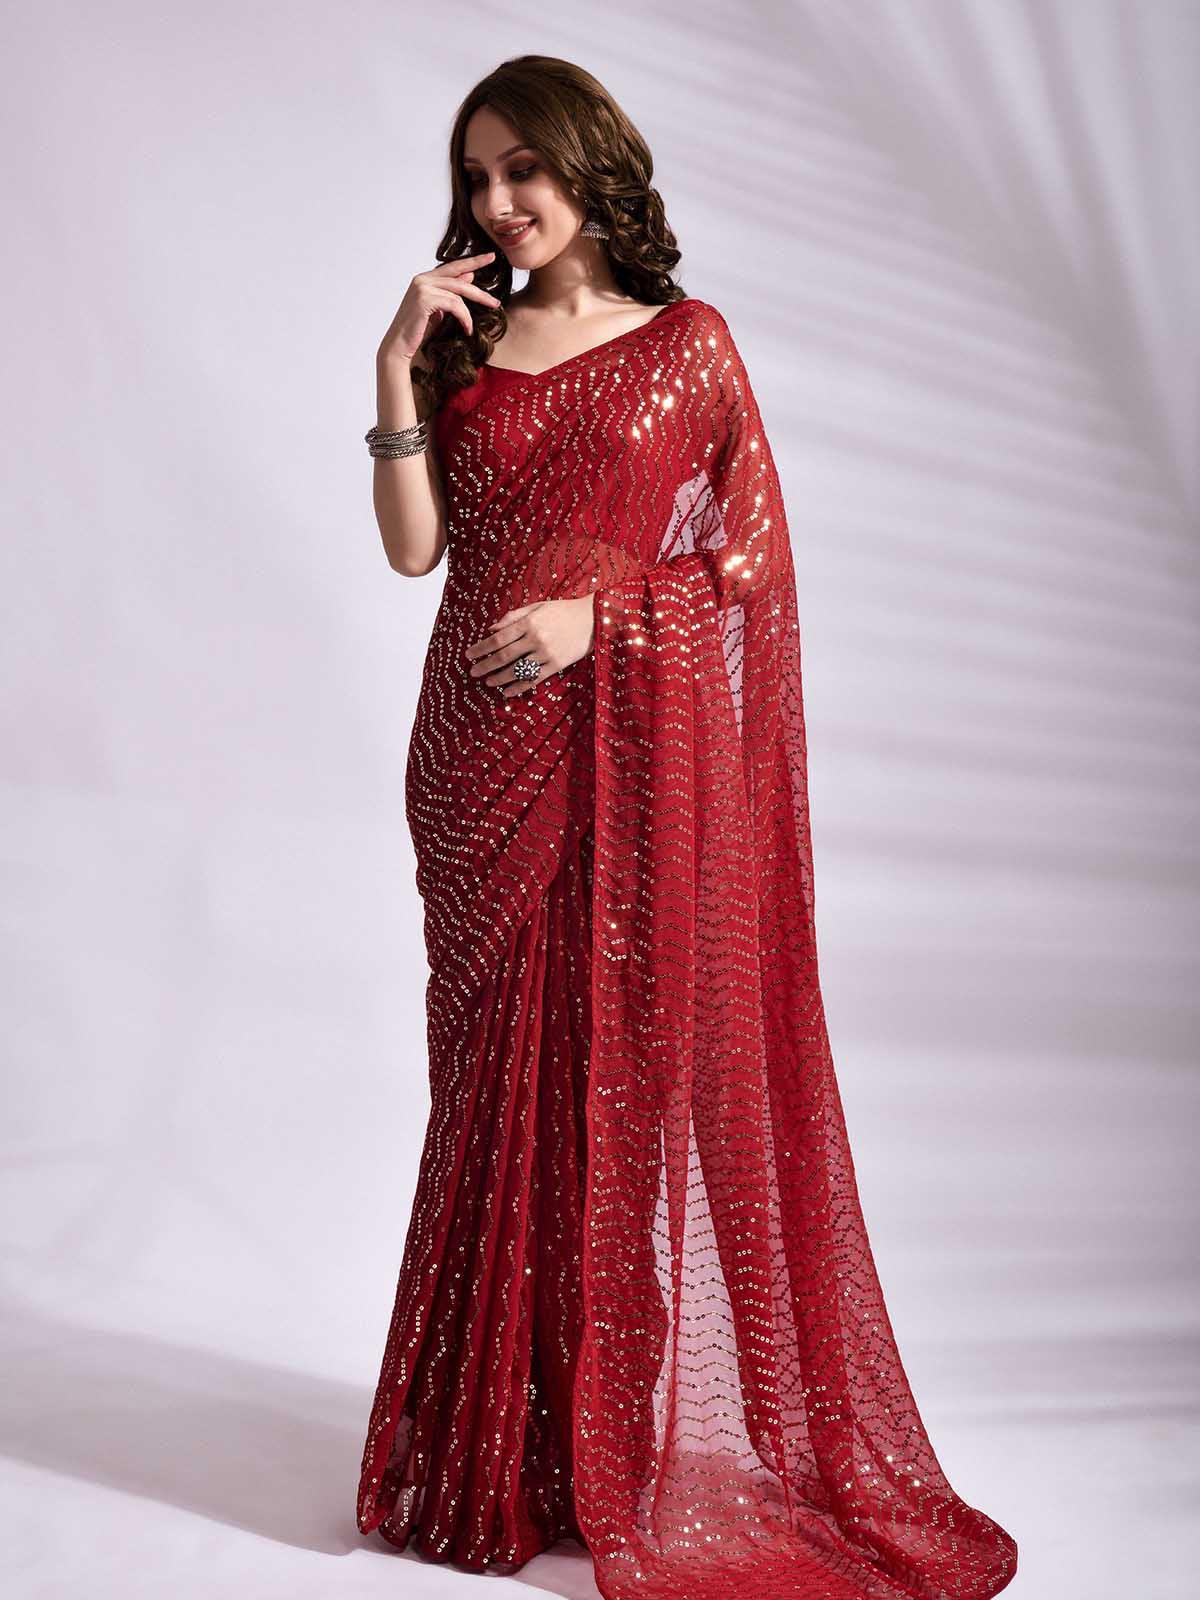 Red Georgette Sequence Saree With Blouse - Odette